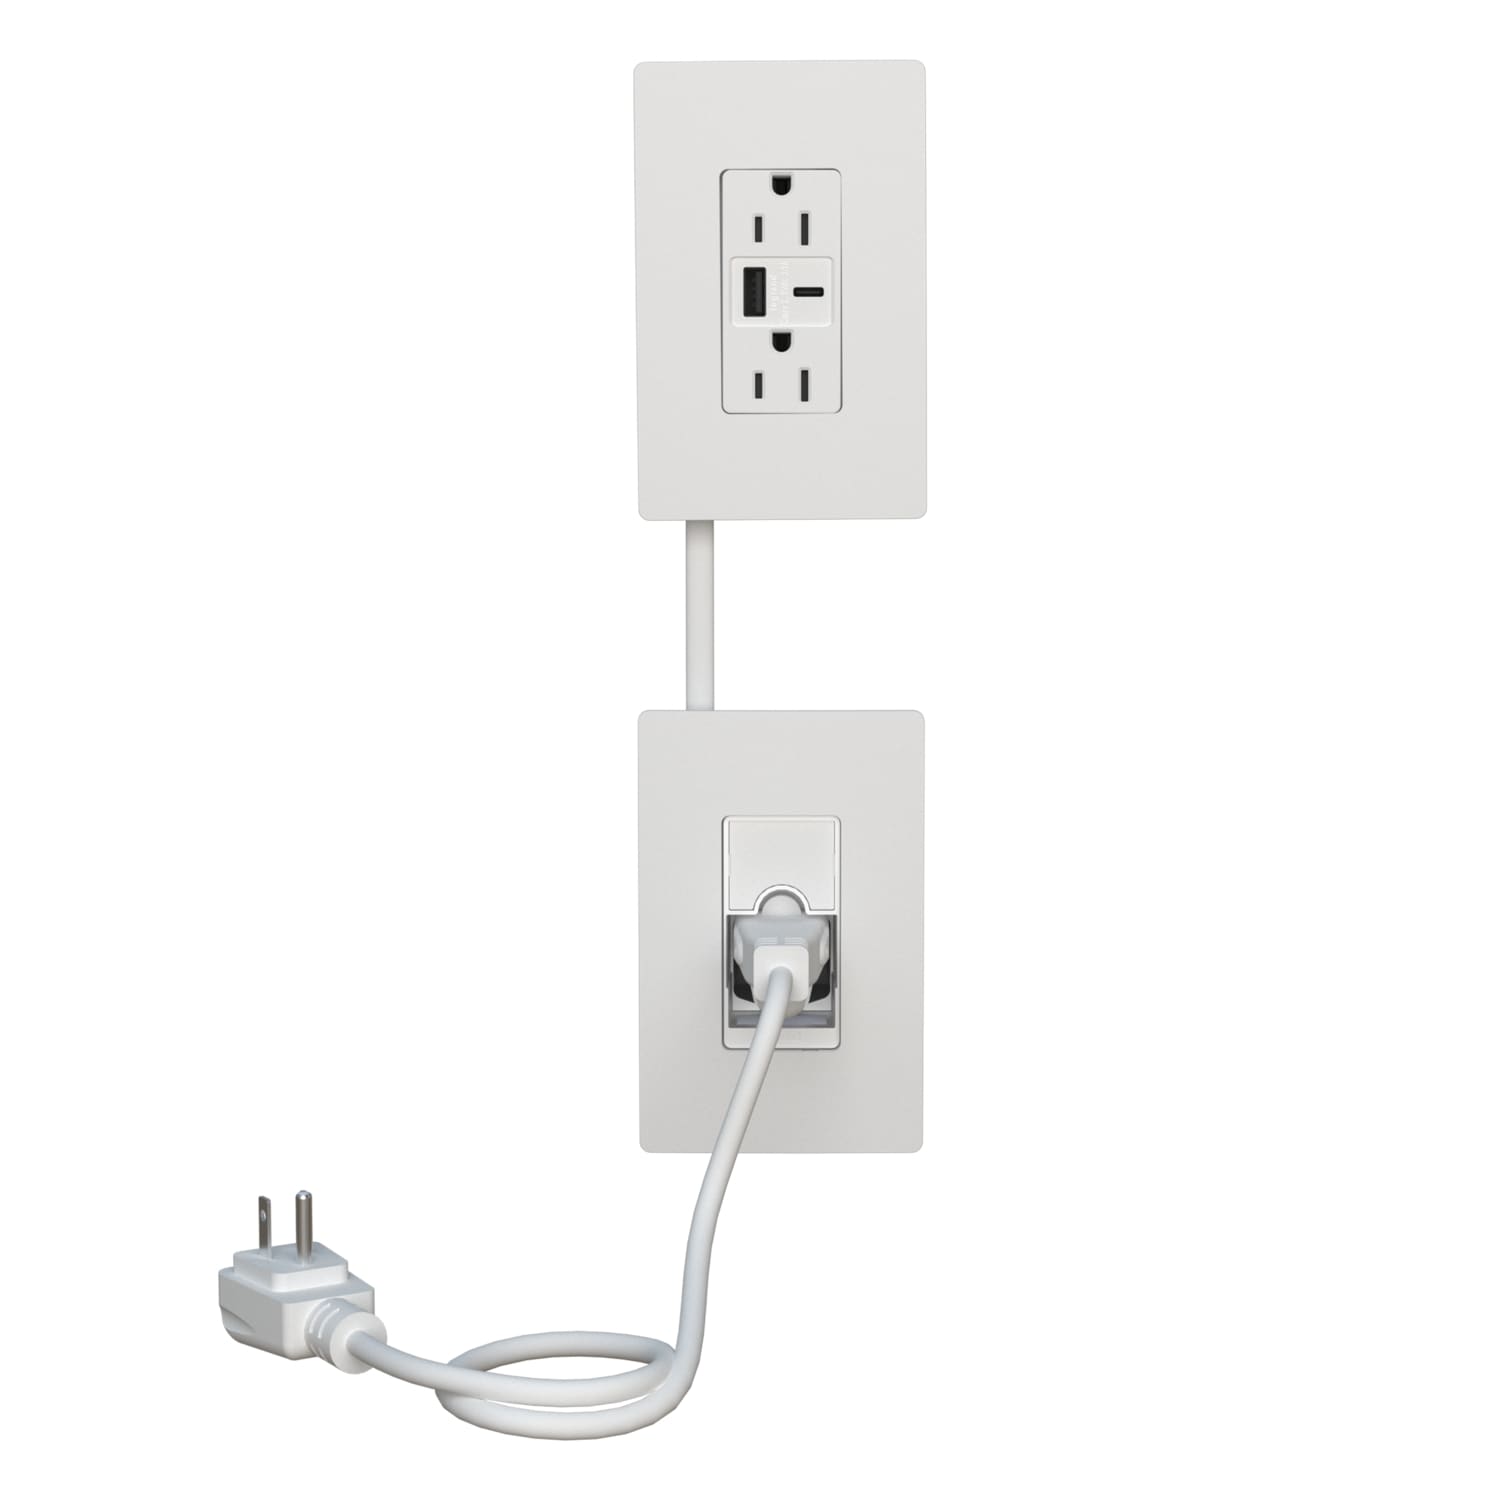 Legrand radiant Outlet Relocation Kit with 15-Amp Tamper Resistant Residential Decorator USB Outlet with Wall Plate, White